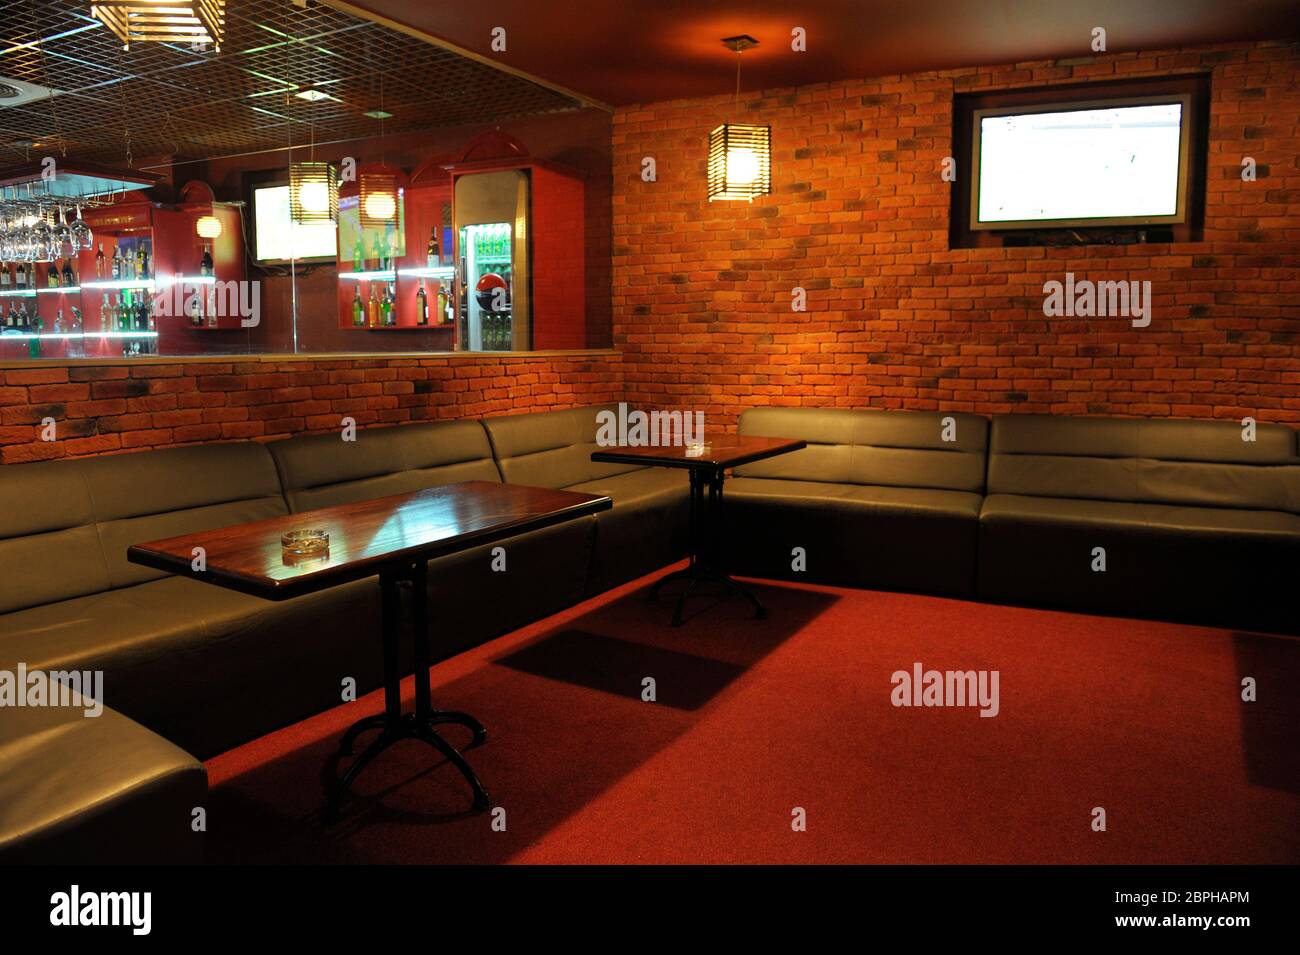 Empty smoking room of a restaurant designed in red color brick walls,  couches and wooden tables with ashtrays Stock Photo - Alamy